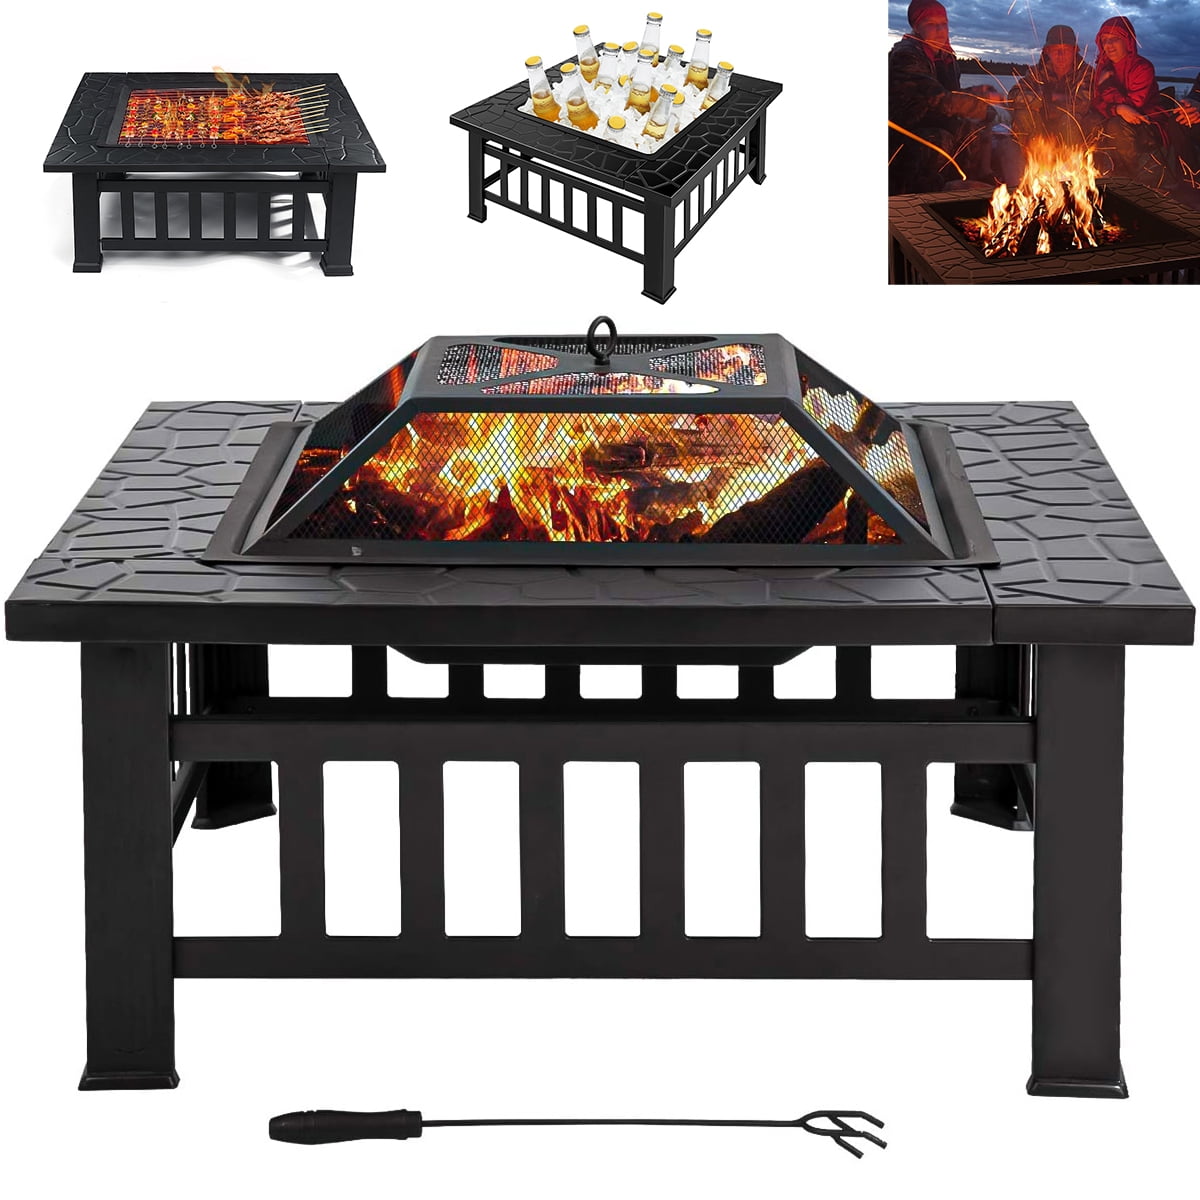 Metal Patio Stove Square Table Fire Bowel Wood Burning Fireplace with Spark Screen,Poker,Grill Lovinland Outdoor Fire Pit 